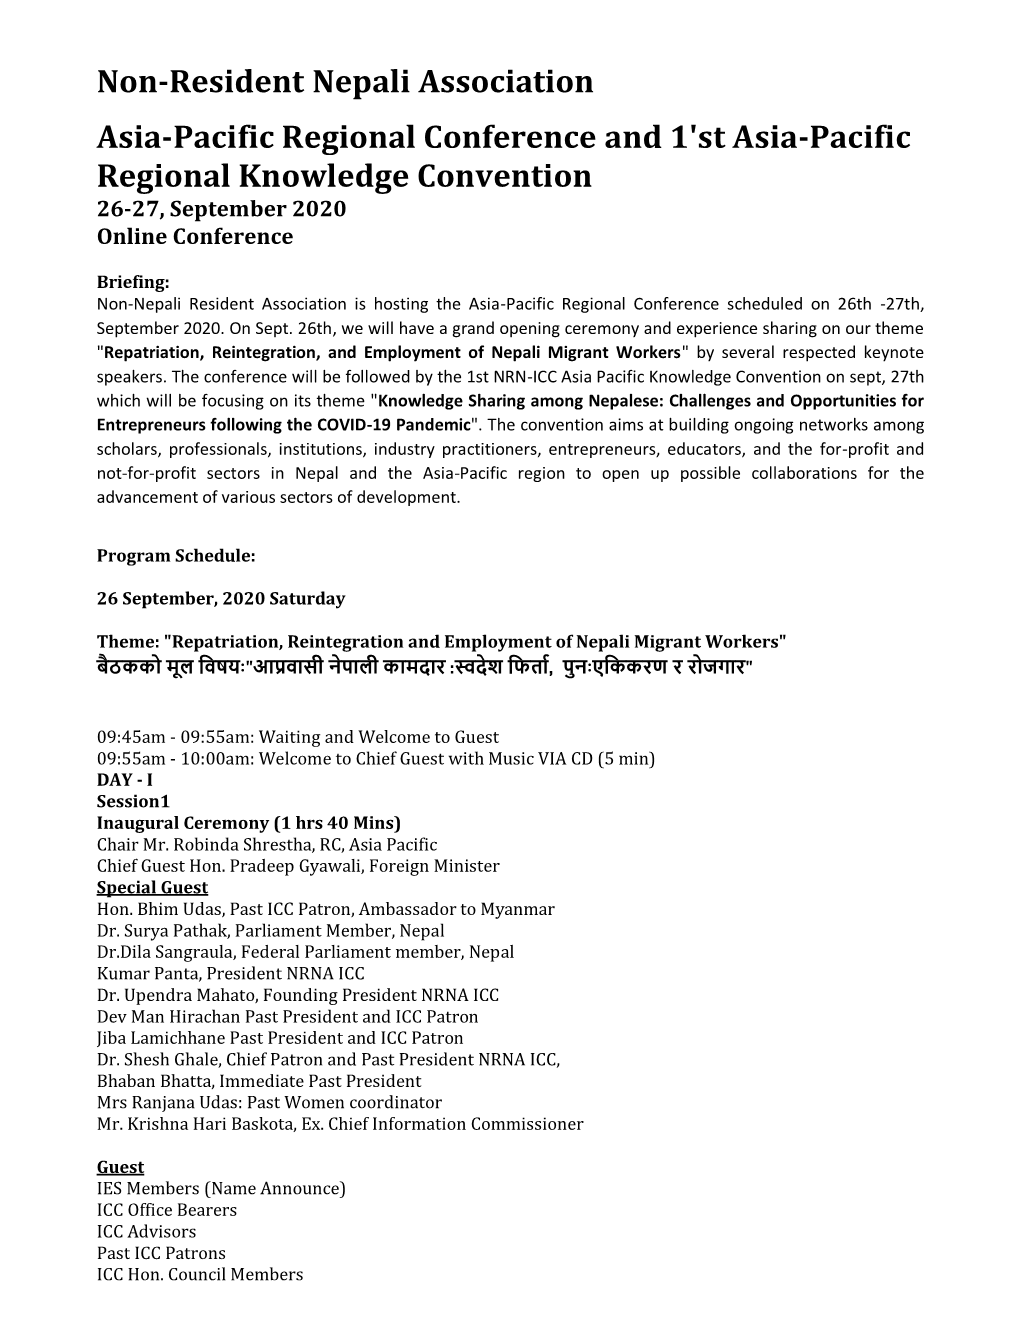 Non-Resident Nepali Association Asia-Pacific Regional Conference and 1'St Asia-Pacific Regional Knowledge Convention 26-27, September 2020 Online Conference